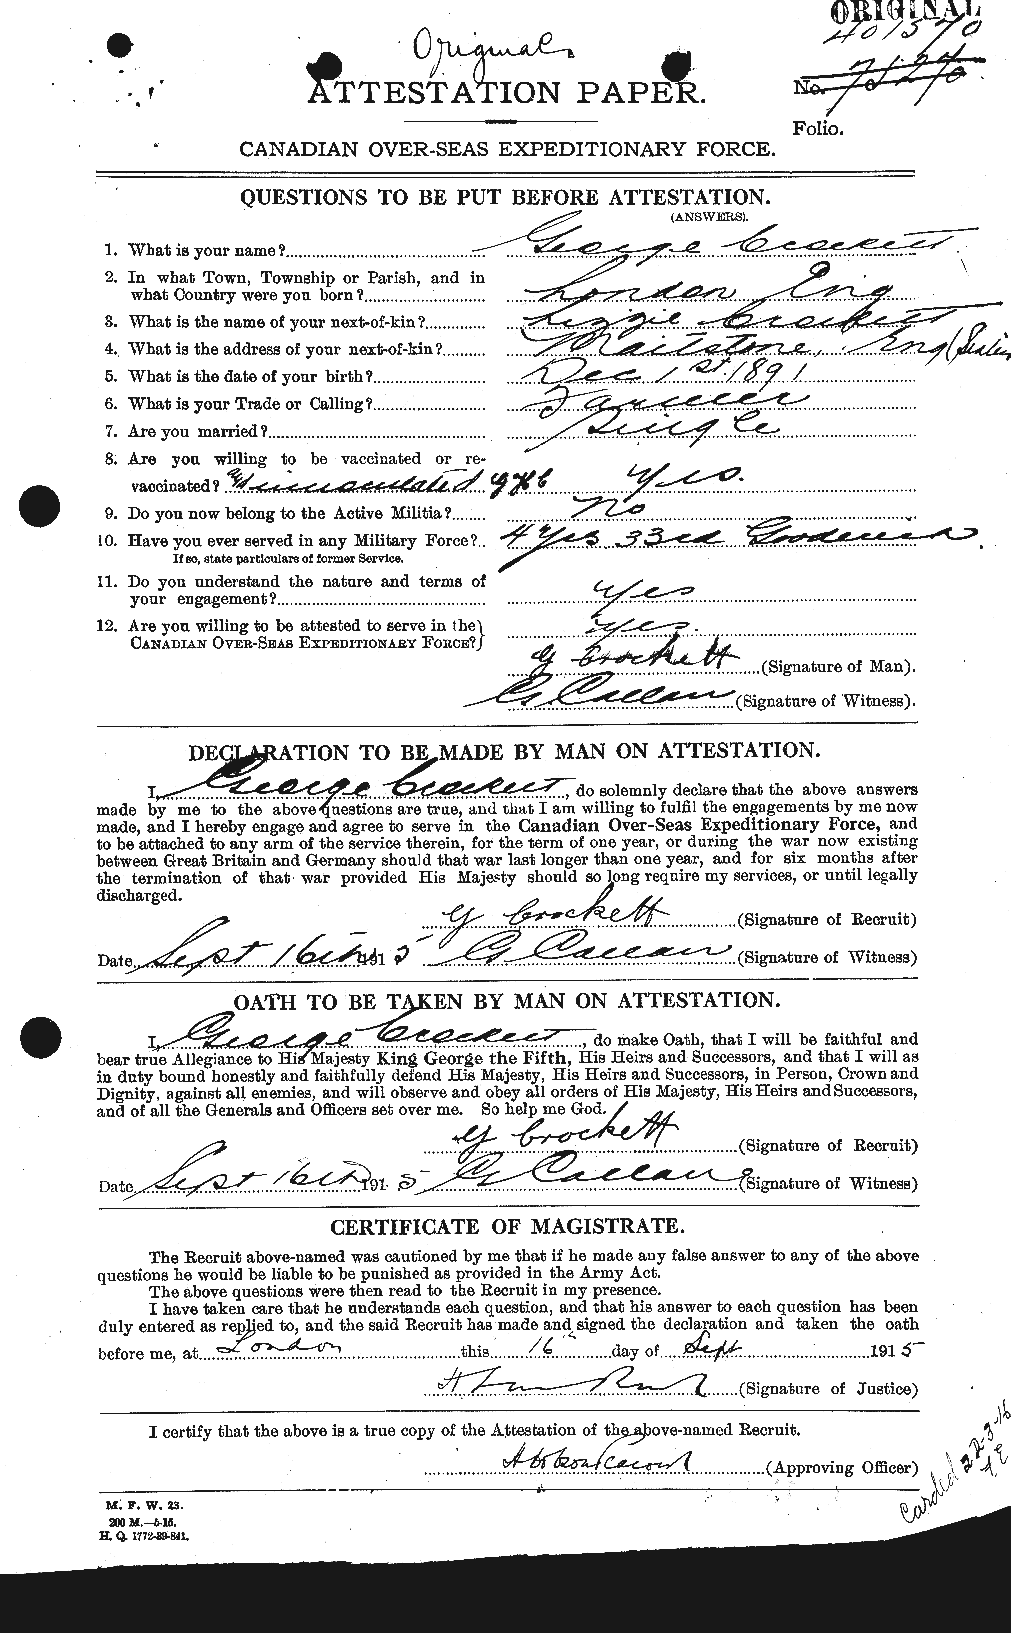 Personnel Records of the First World War - CEF 064708a